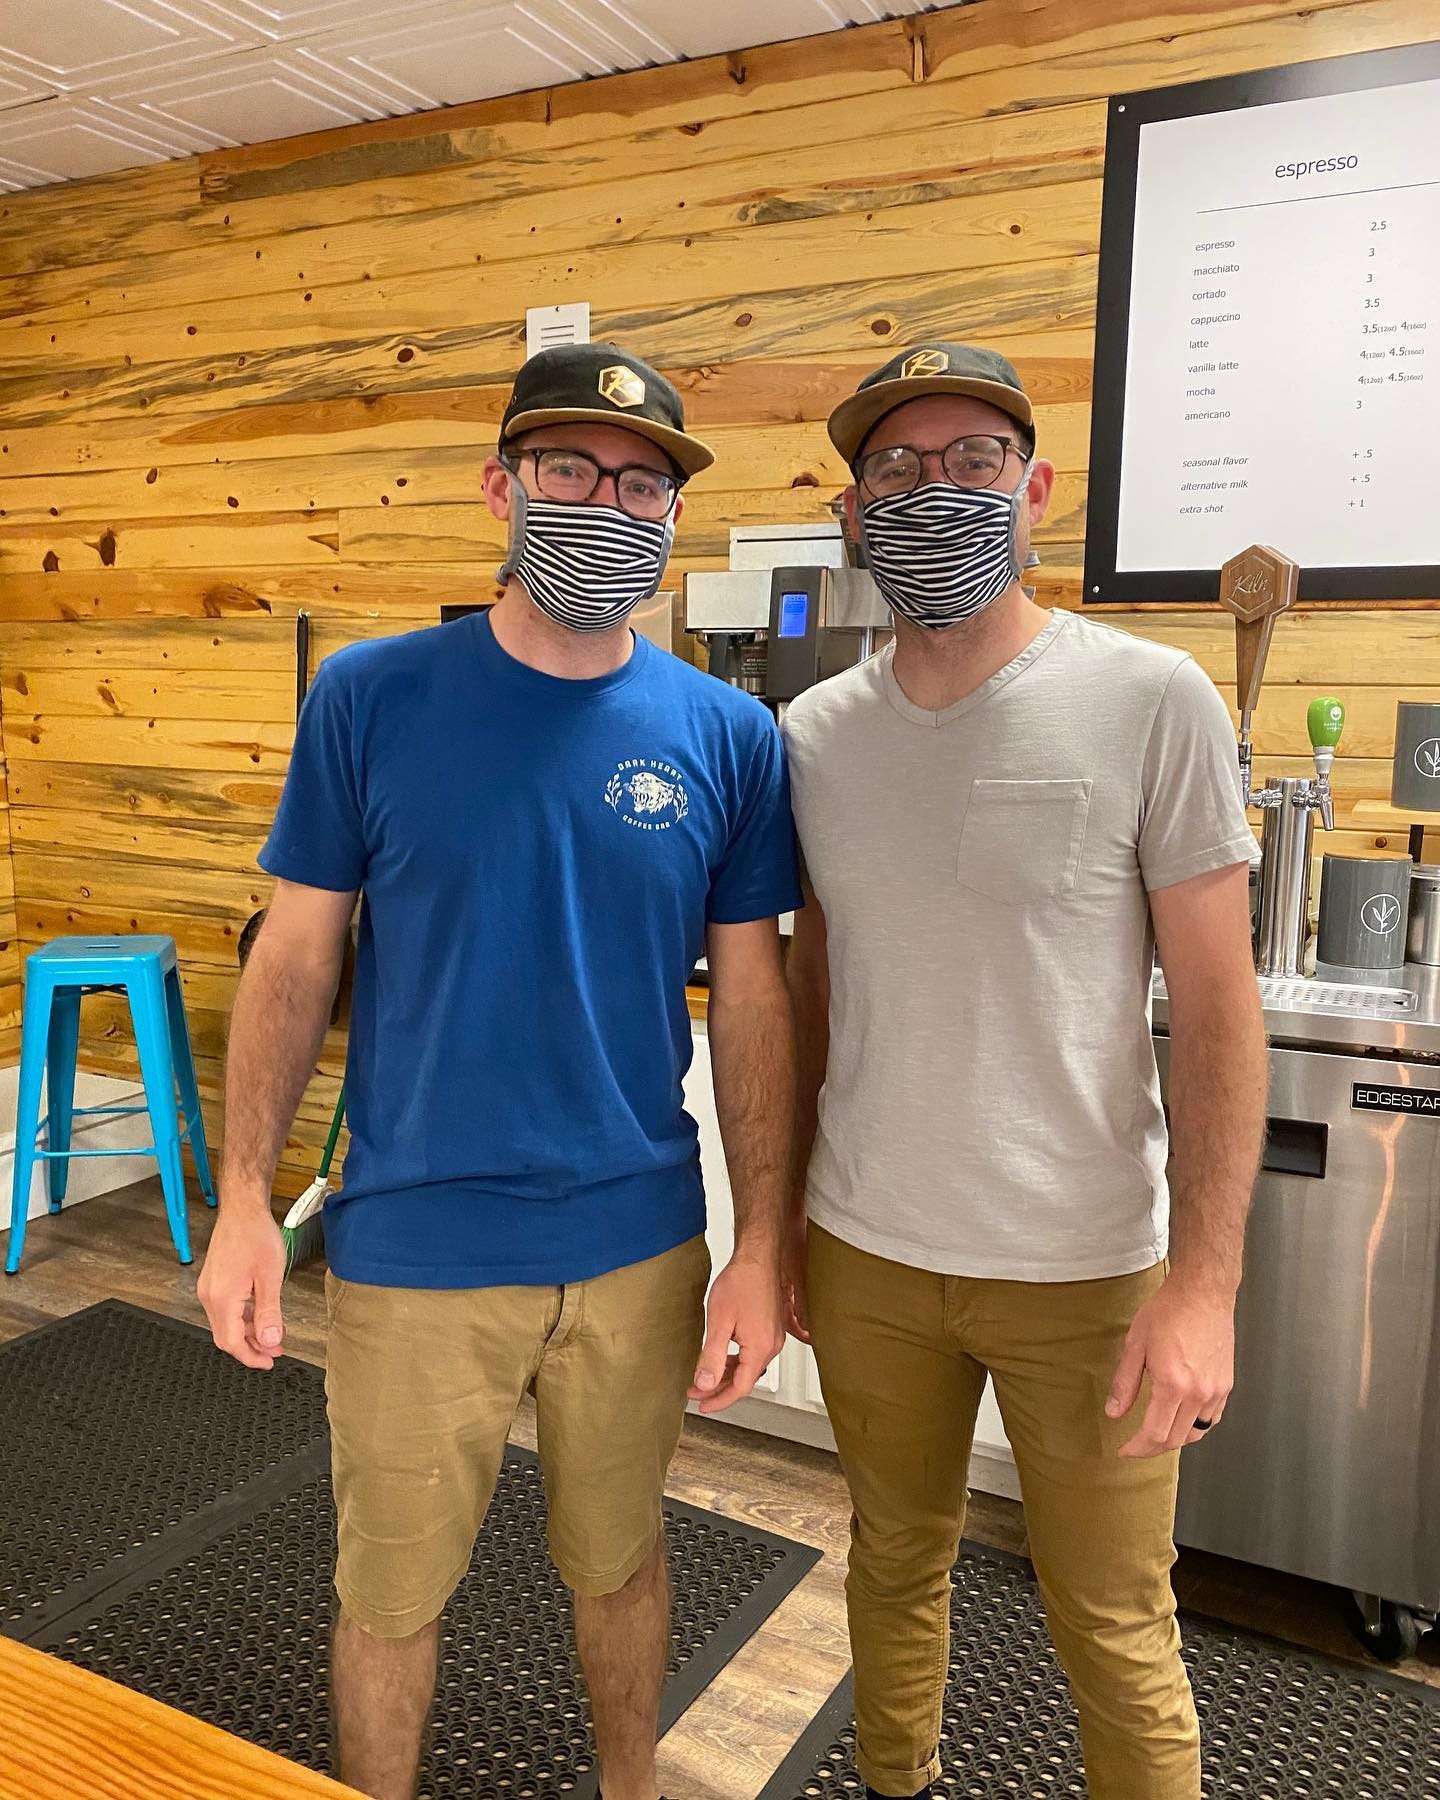 Identical twin brothers (caucasian) pose for the camera in matching masks and glasses in front of a pine wood wall at a coffee shop.